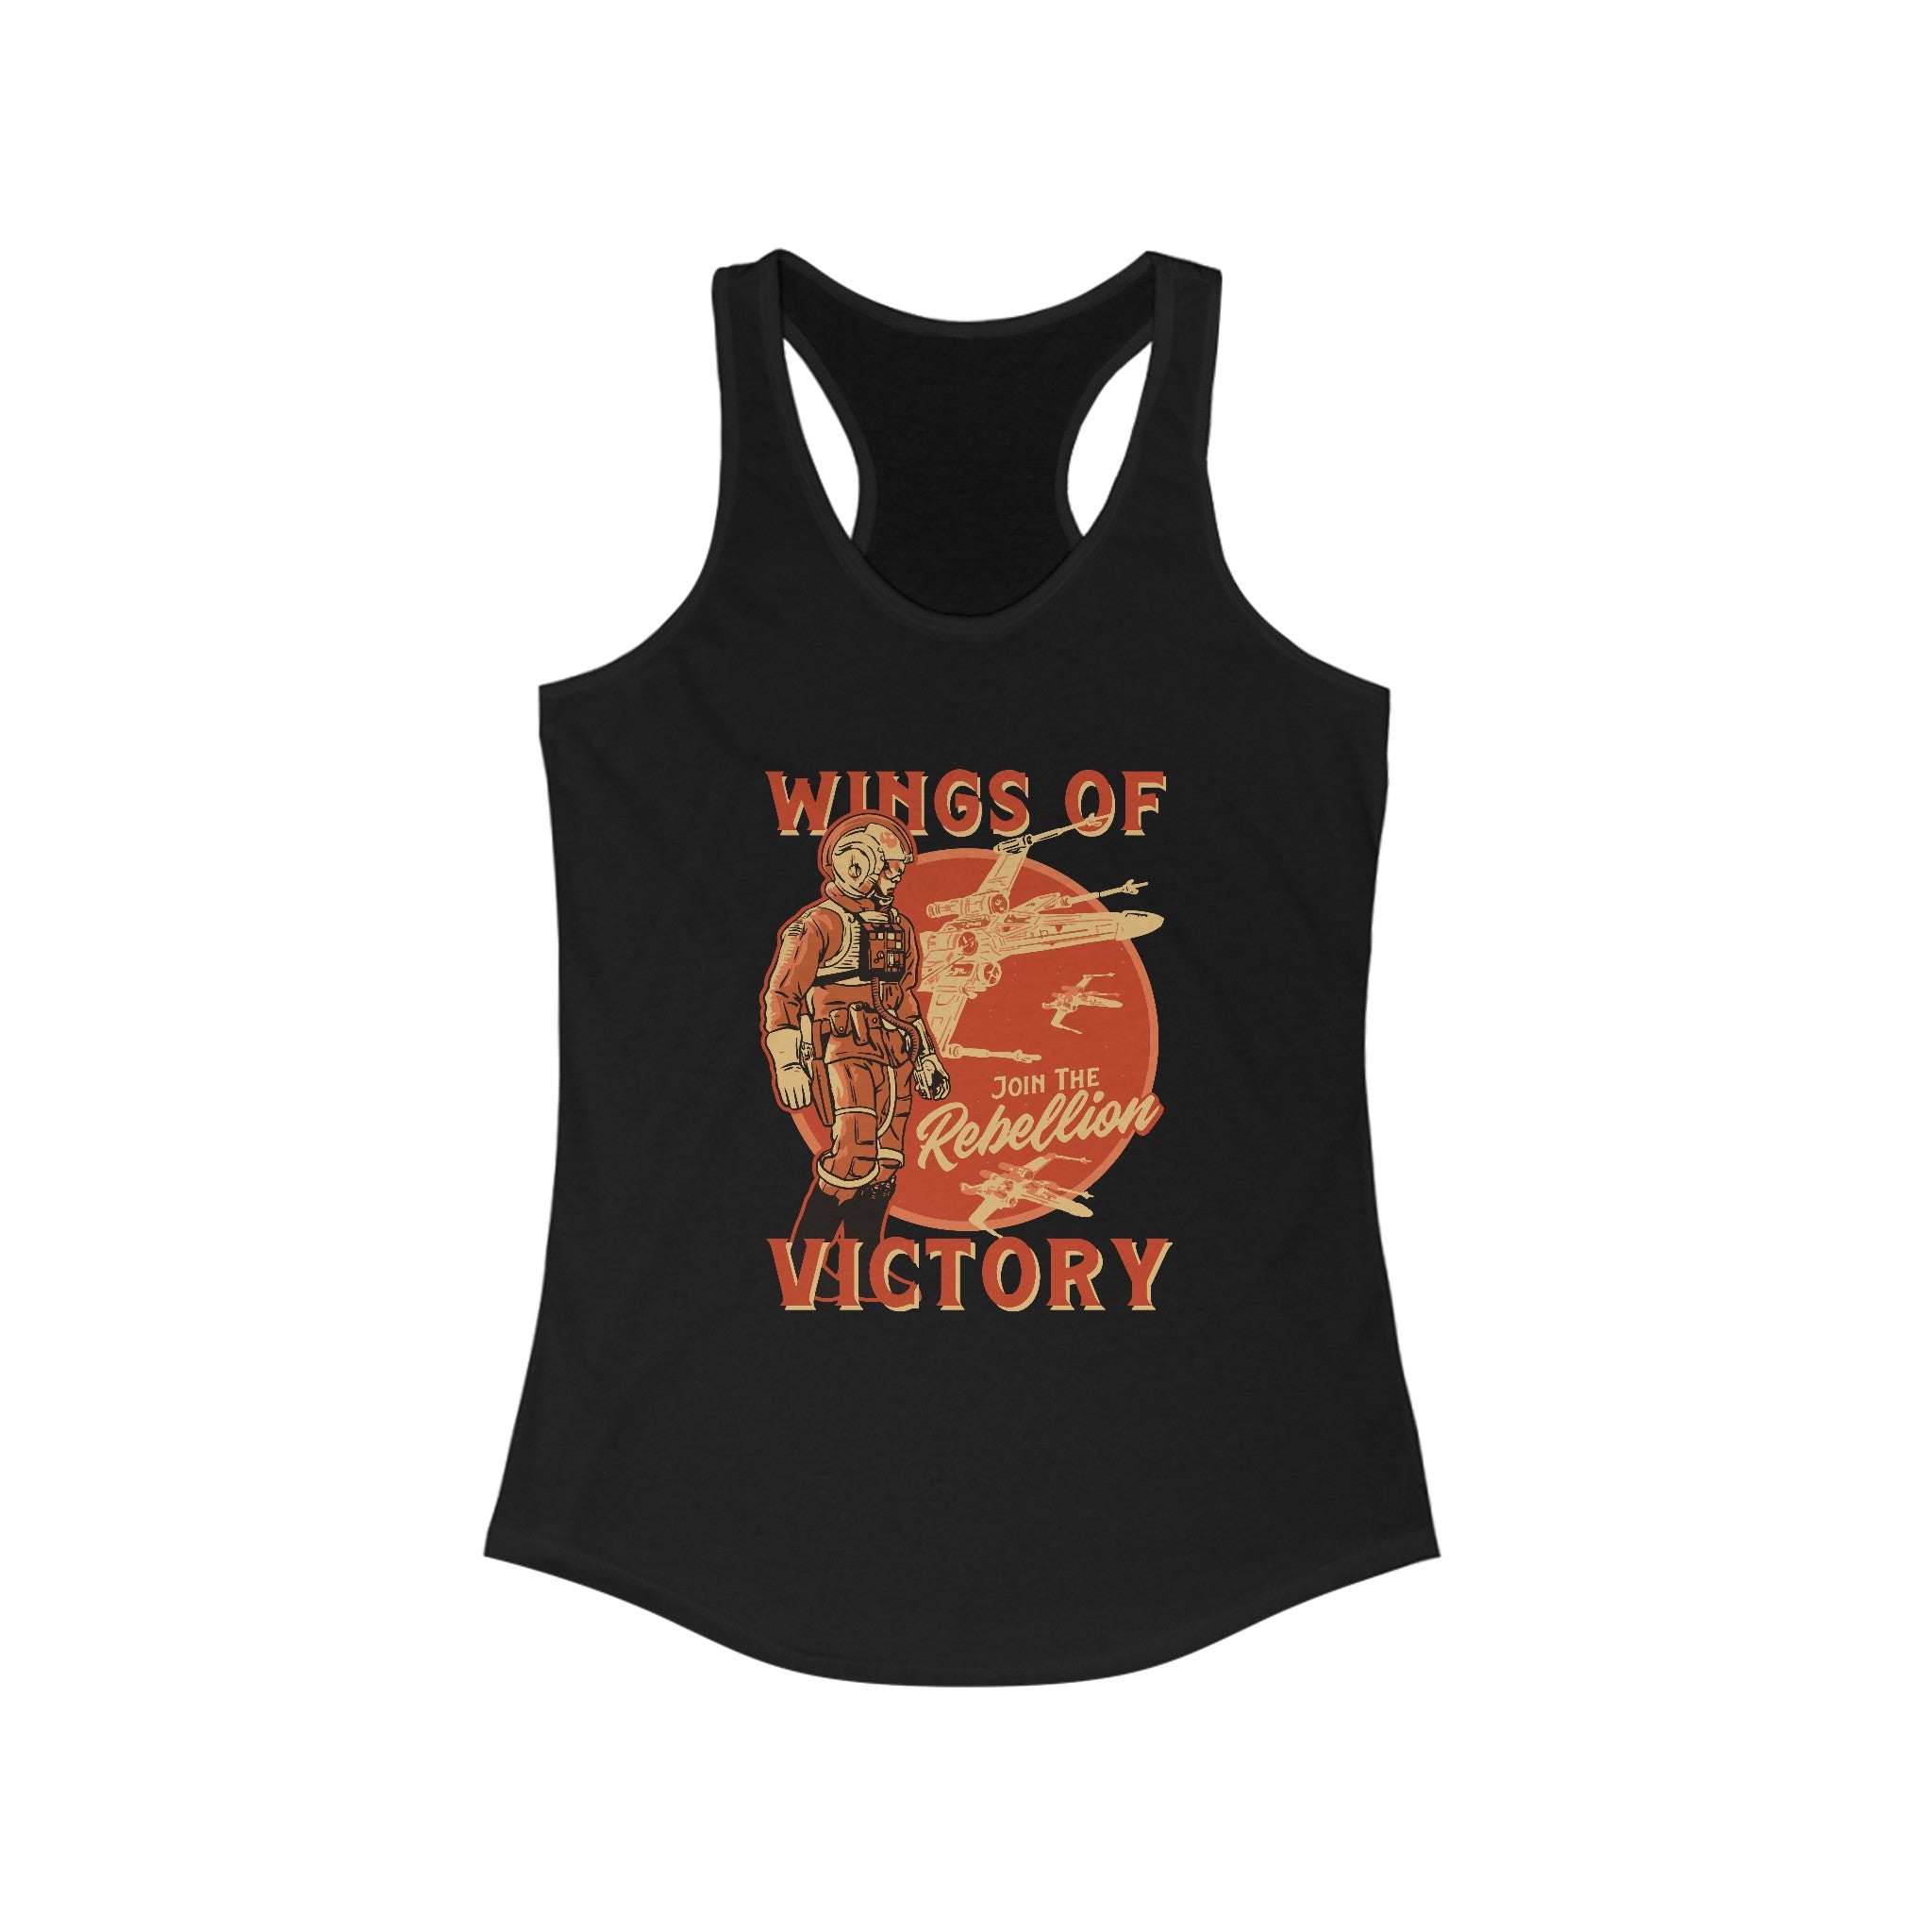 Wings of Victory - Women's Racerback Tank in black, featuring a graphic of a jetpack-wearing figure and bold text that reads, "Wings of Victory, Join the Rebellion," perfect for active living.